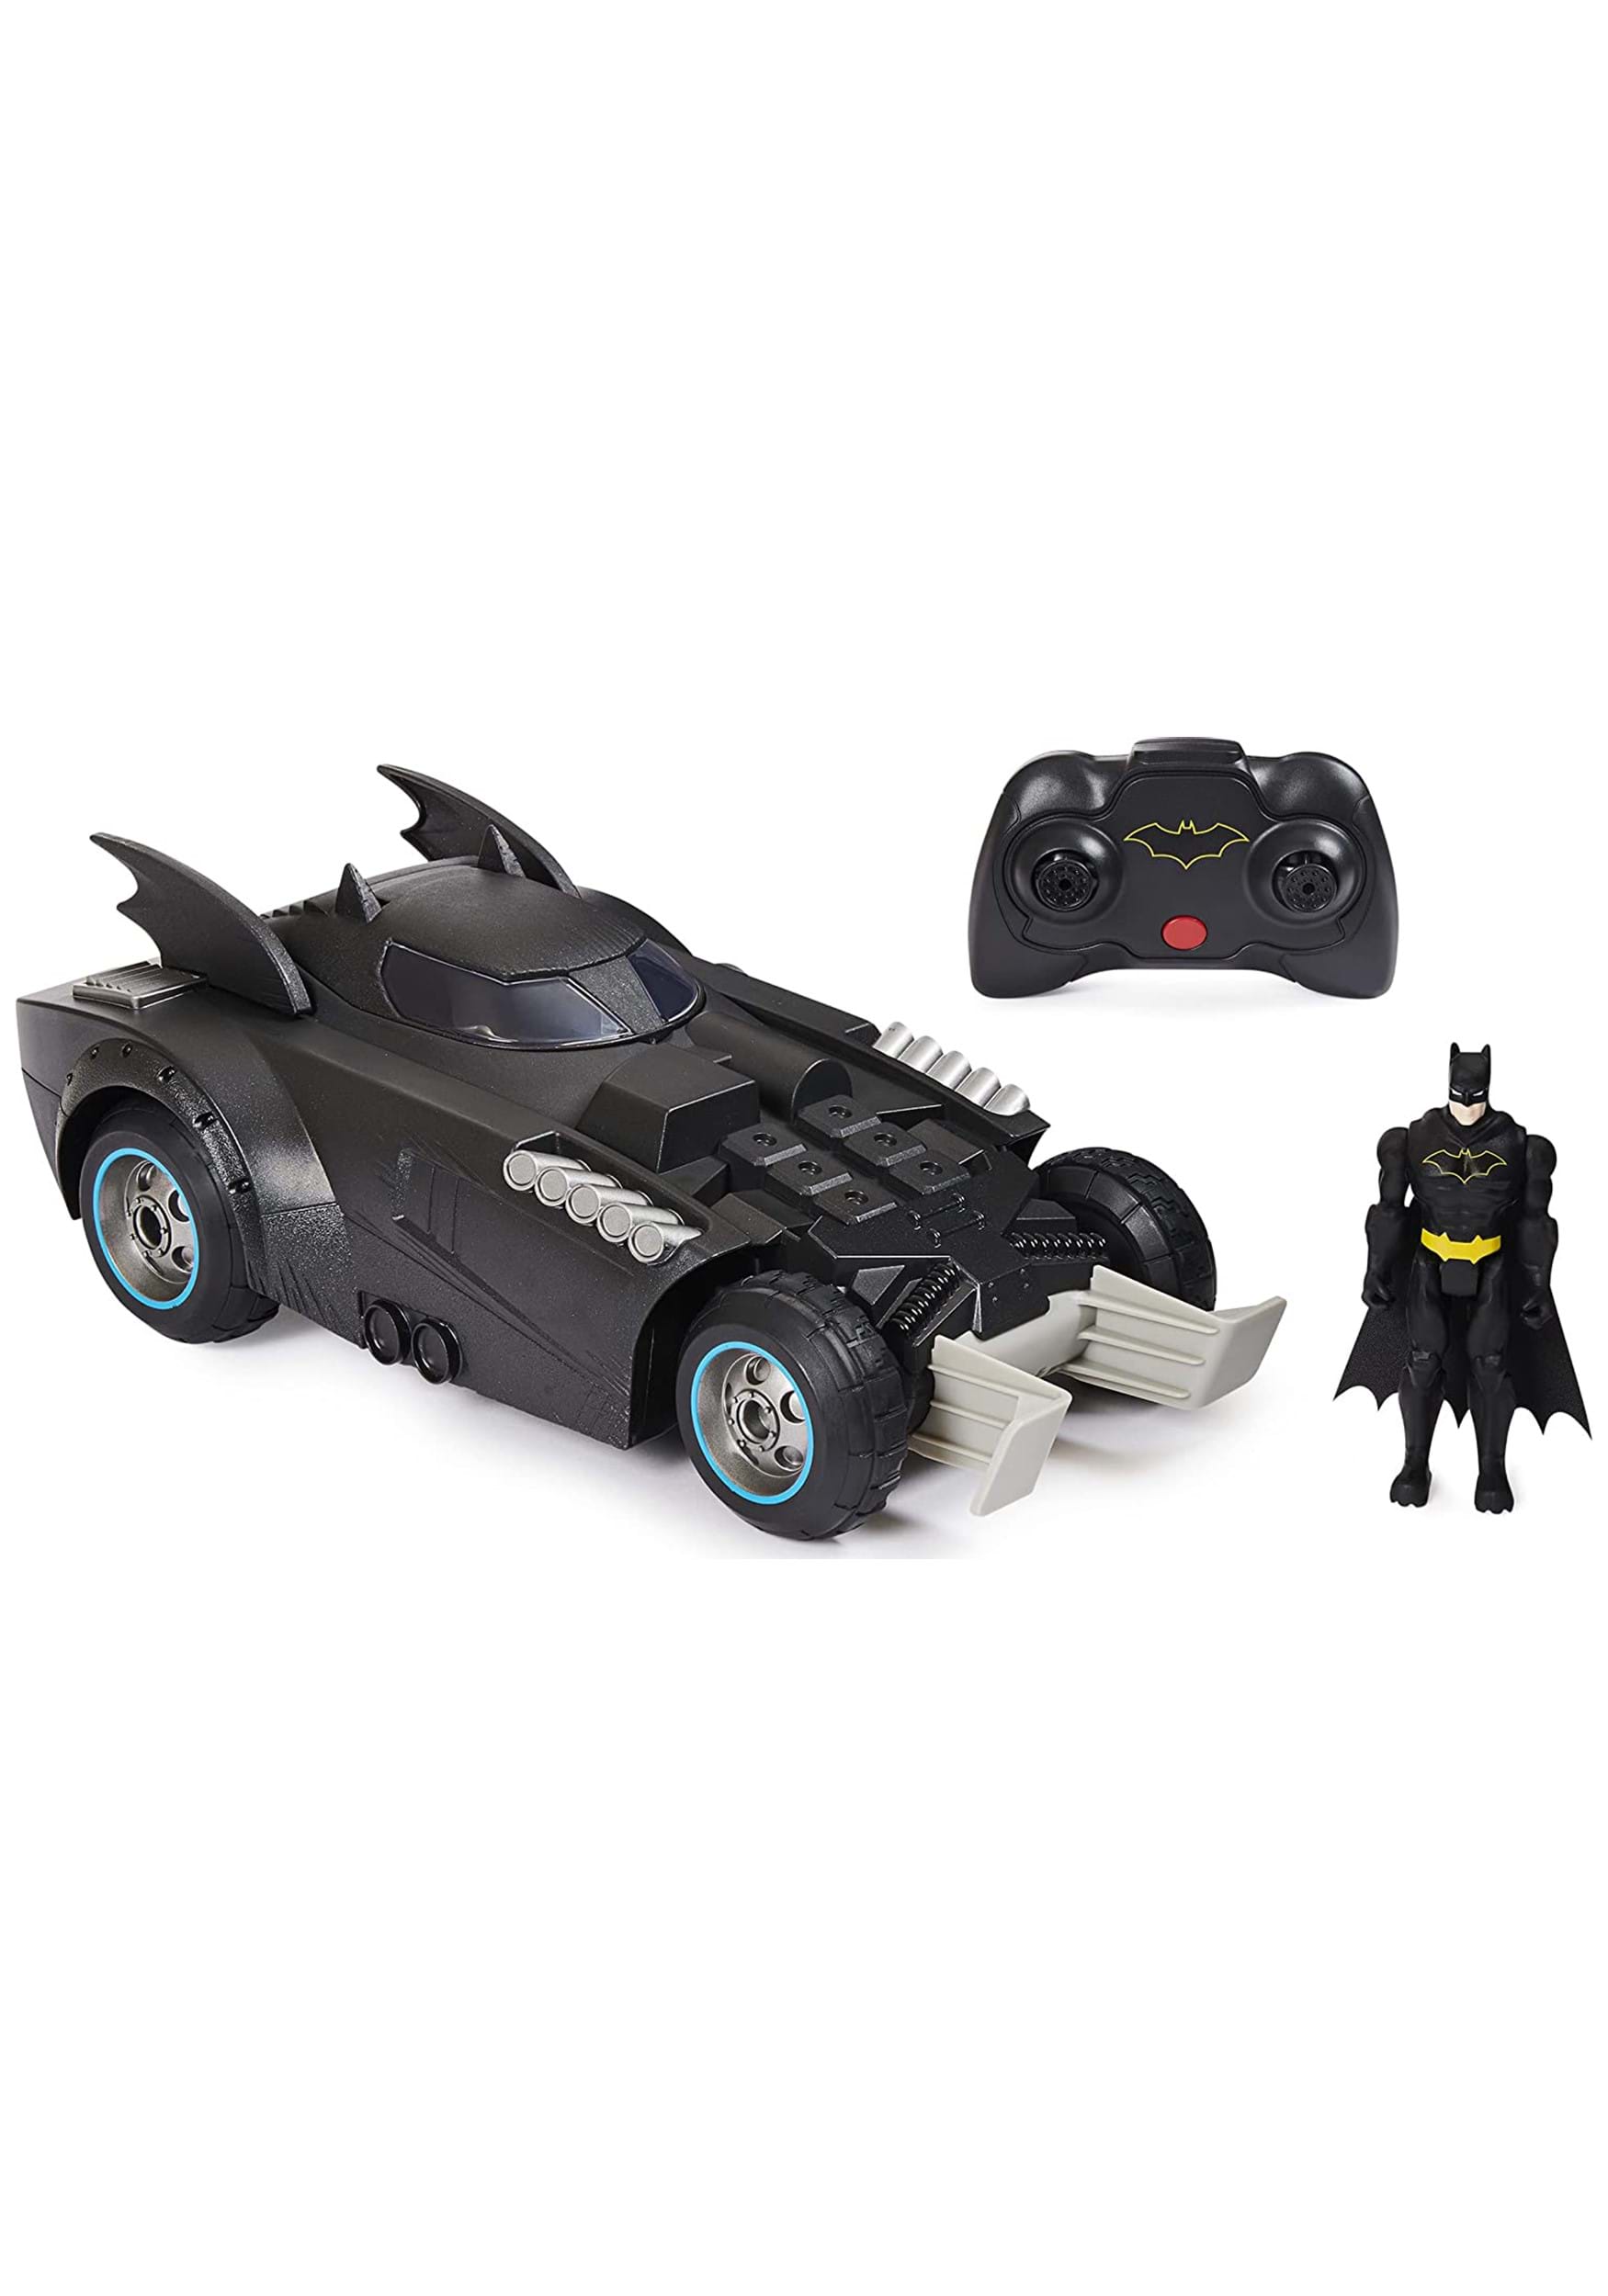 DC Batman Launch and Defend Batmobile Remote Control with 4 Inch Figure